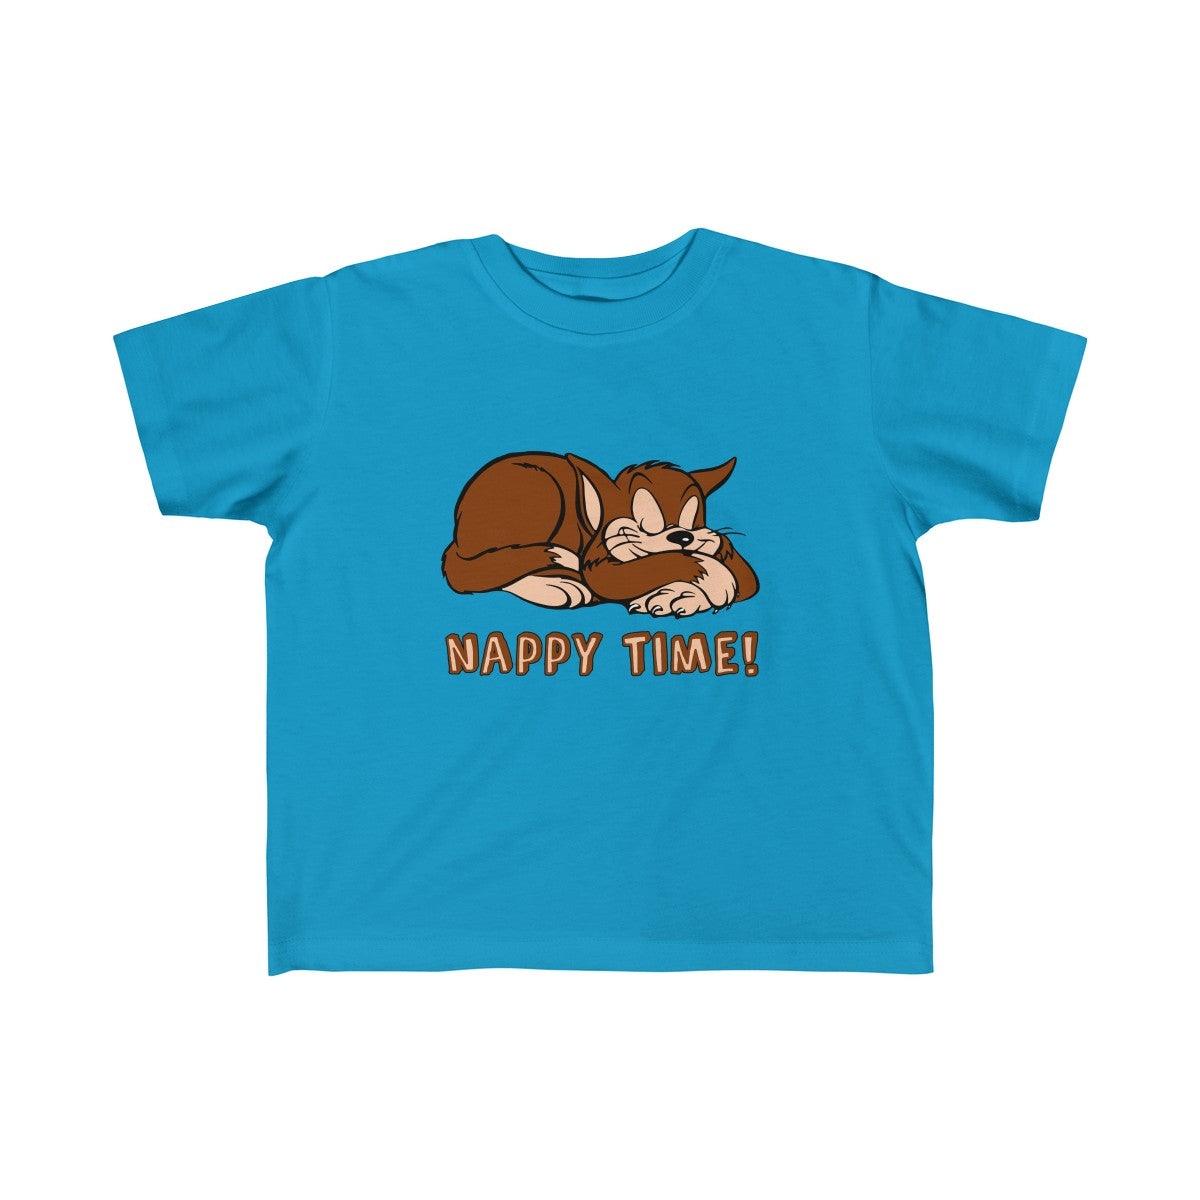 Nappy Time! with Sleeping Cat Toddler Fine Jersey Tee-Kids clothes-PureDesignTees